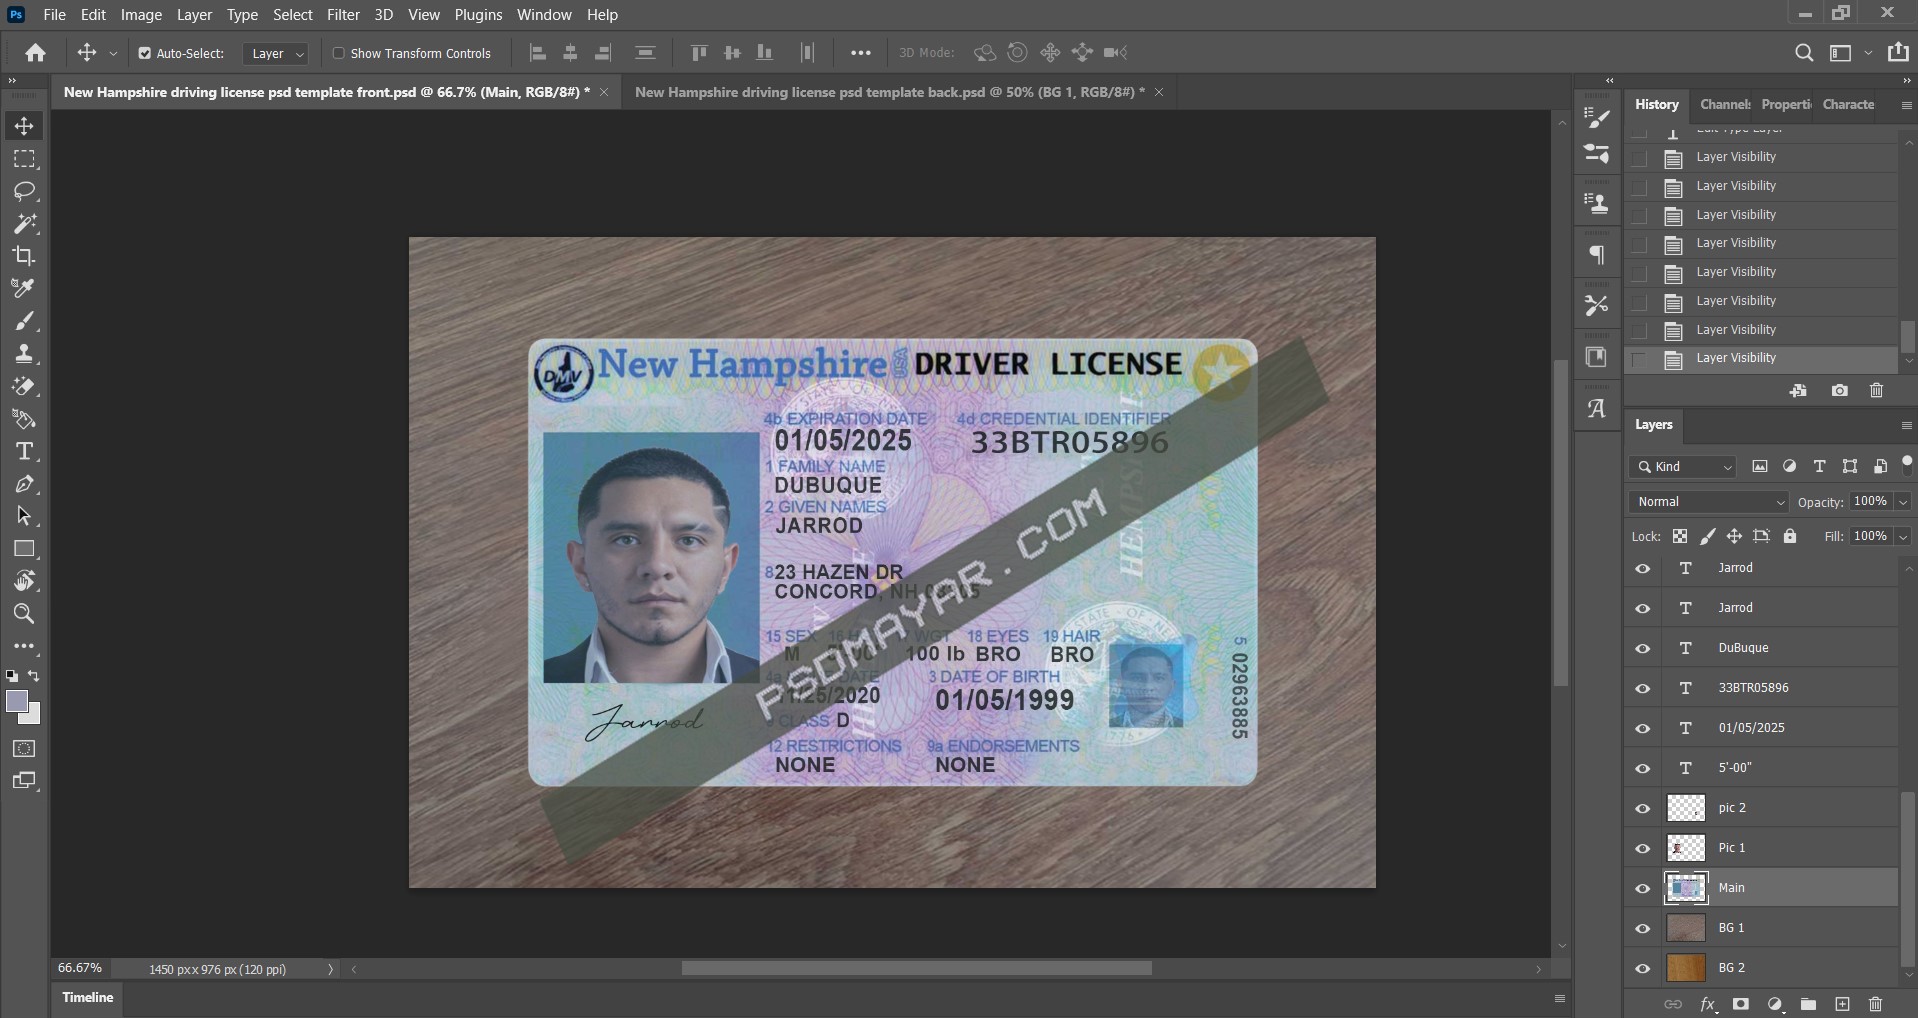 New Hampshire driving license psd